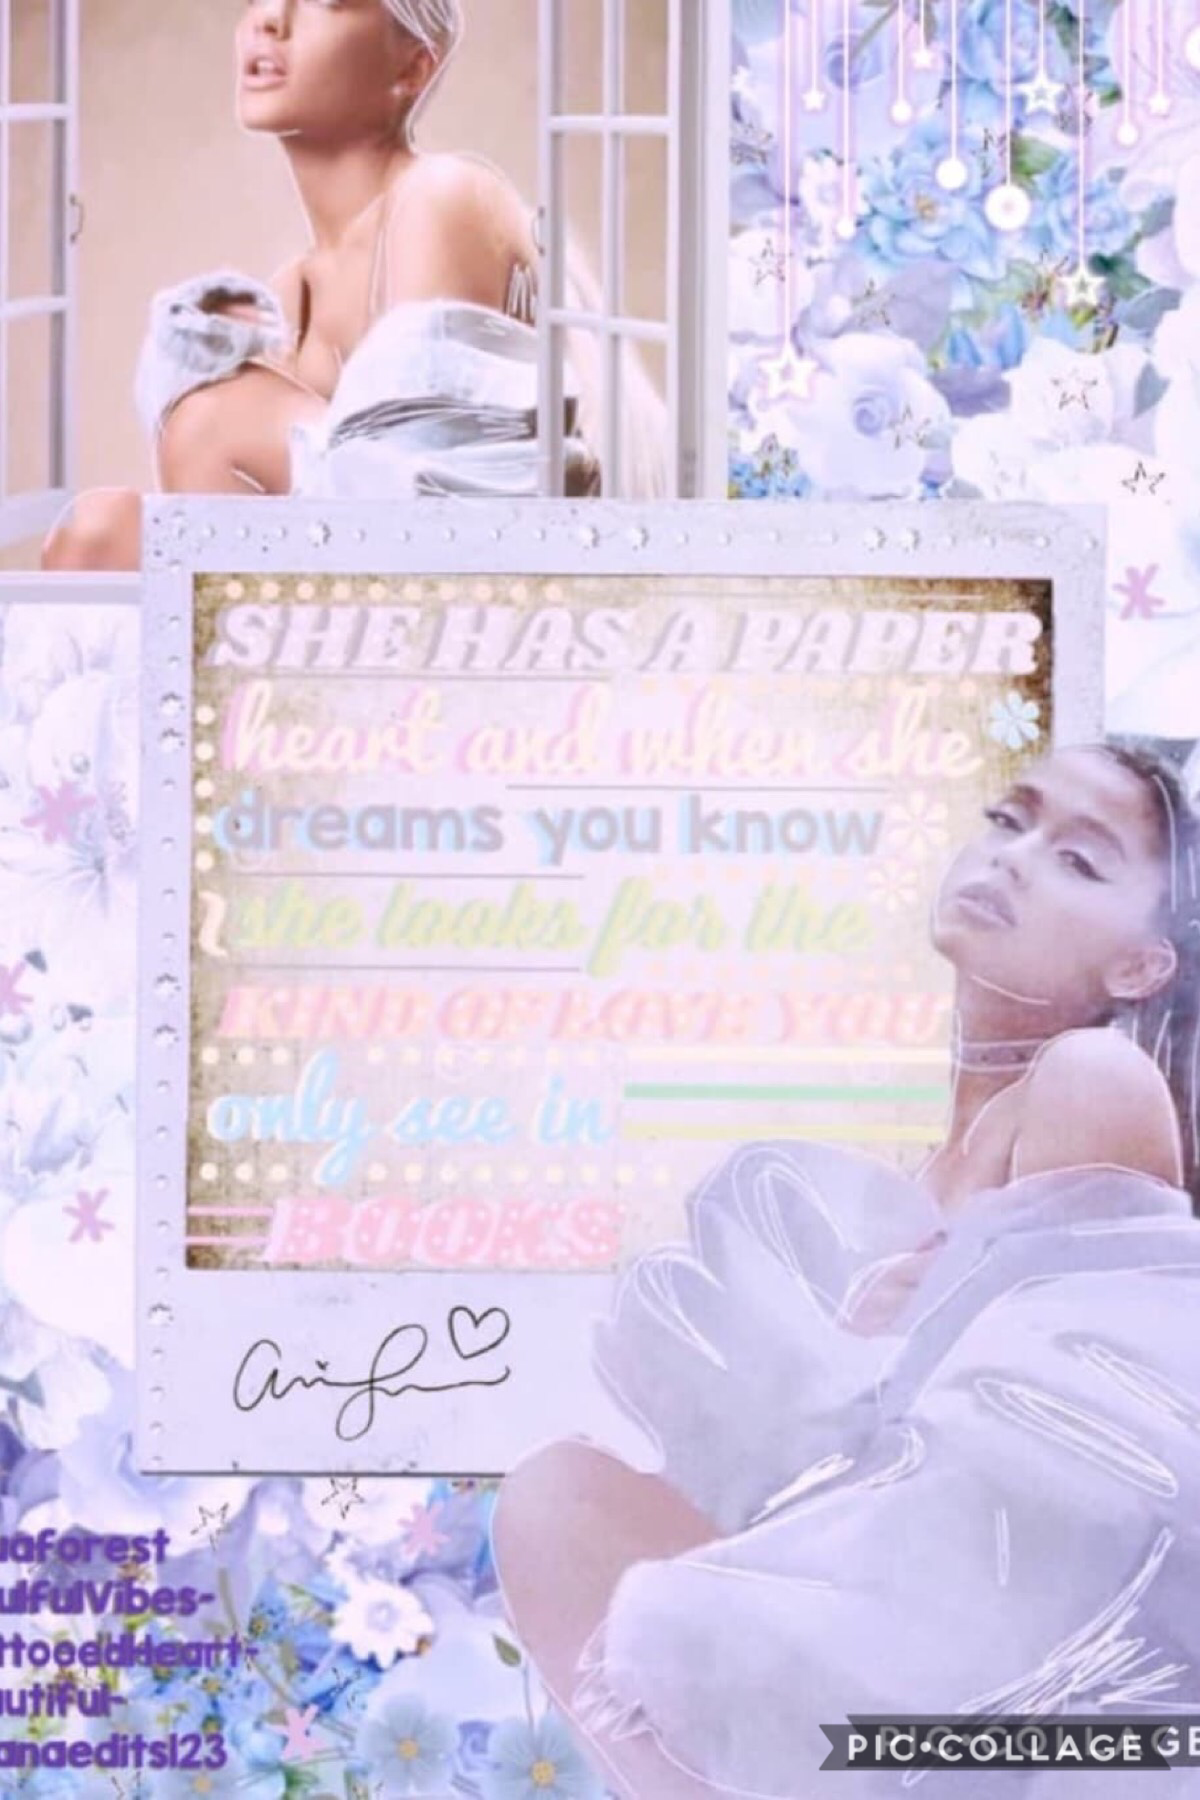 💖Tap (PLEASE)
MEGA COLLAB BY THEDAILYGRANDE 

Background: -TattooedHeart- (me)
Pngs/final touches: arianaedits123 
Choose the overall theme and colour theme: Beautiful-
Text: SoulfulVibes-
Choose the quote: aquaforest 

Go follow all of those AMAZING peop